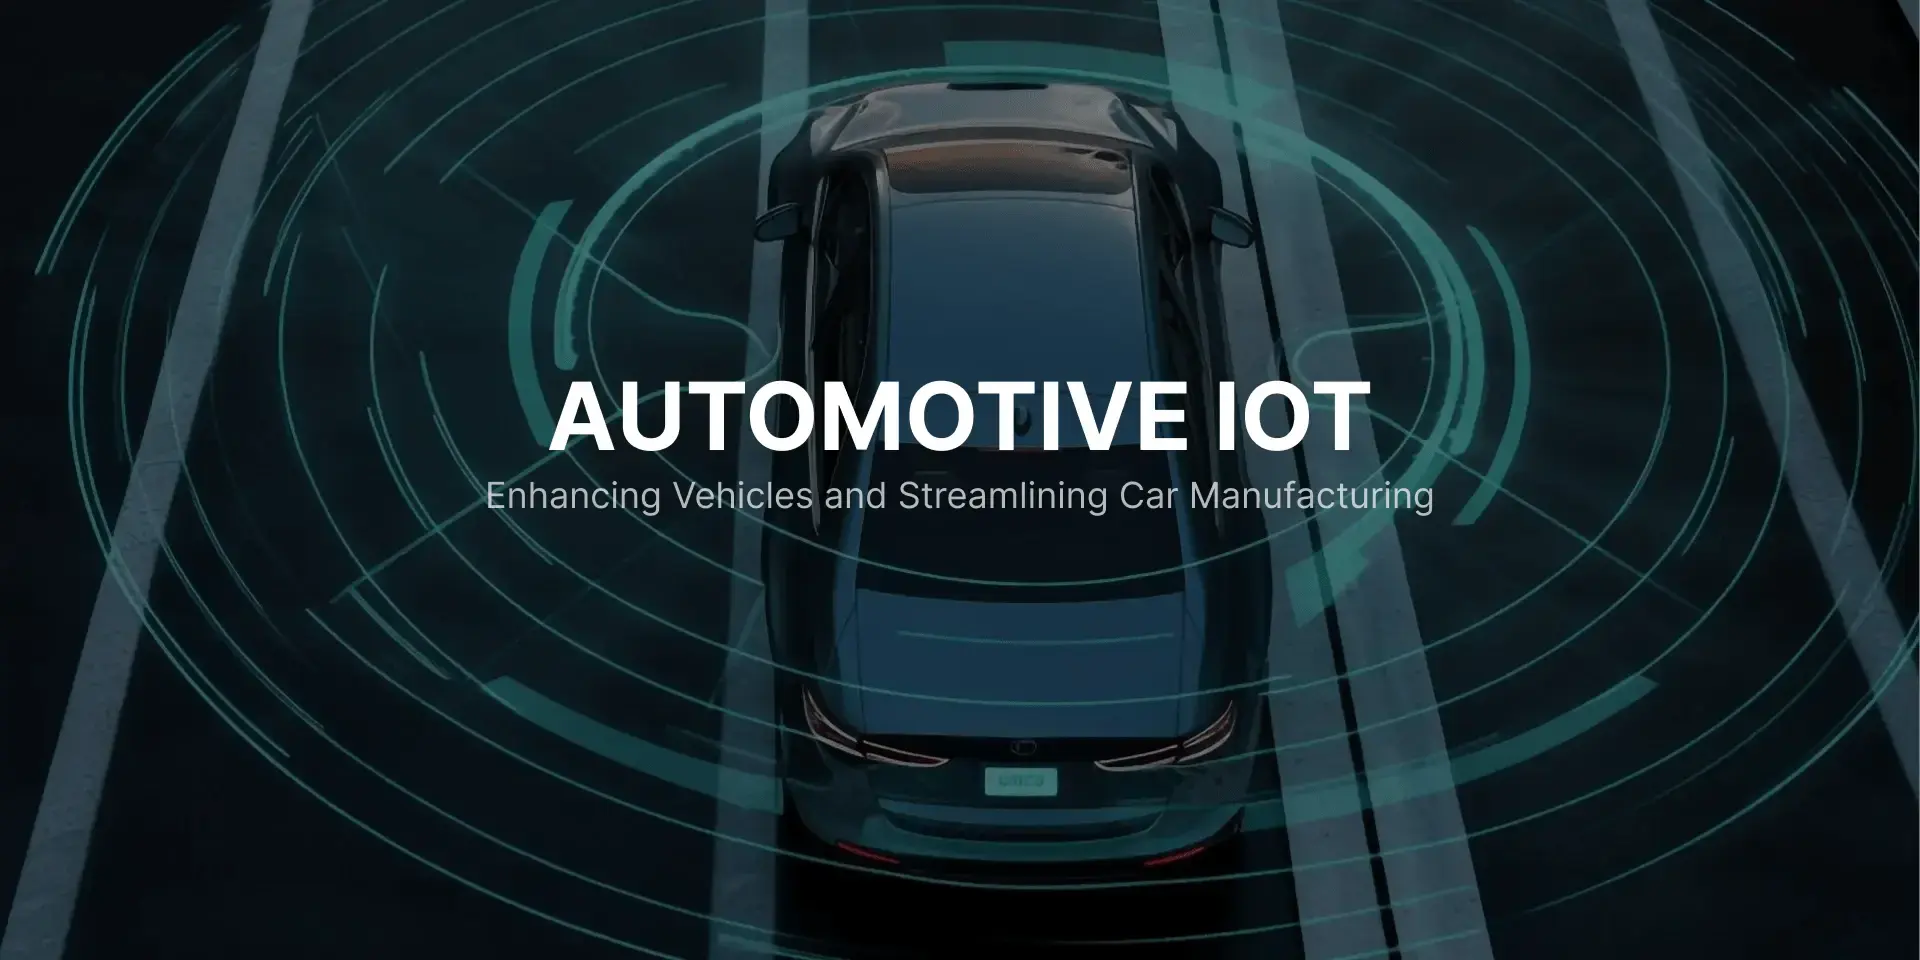 Automotive IoT: Enhancing Vehicles and Streamlining Car Manufacturing